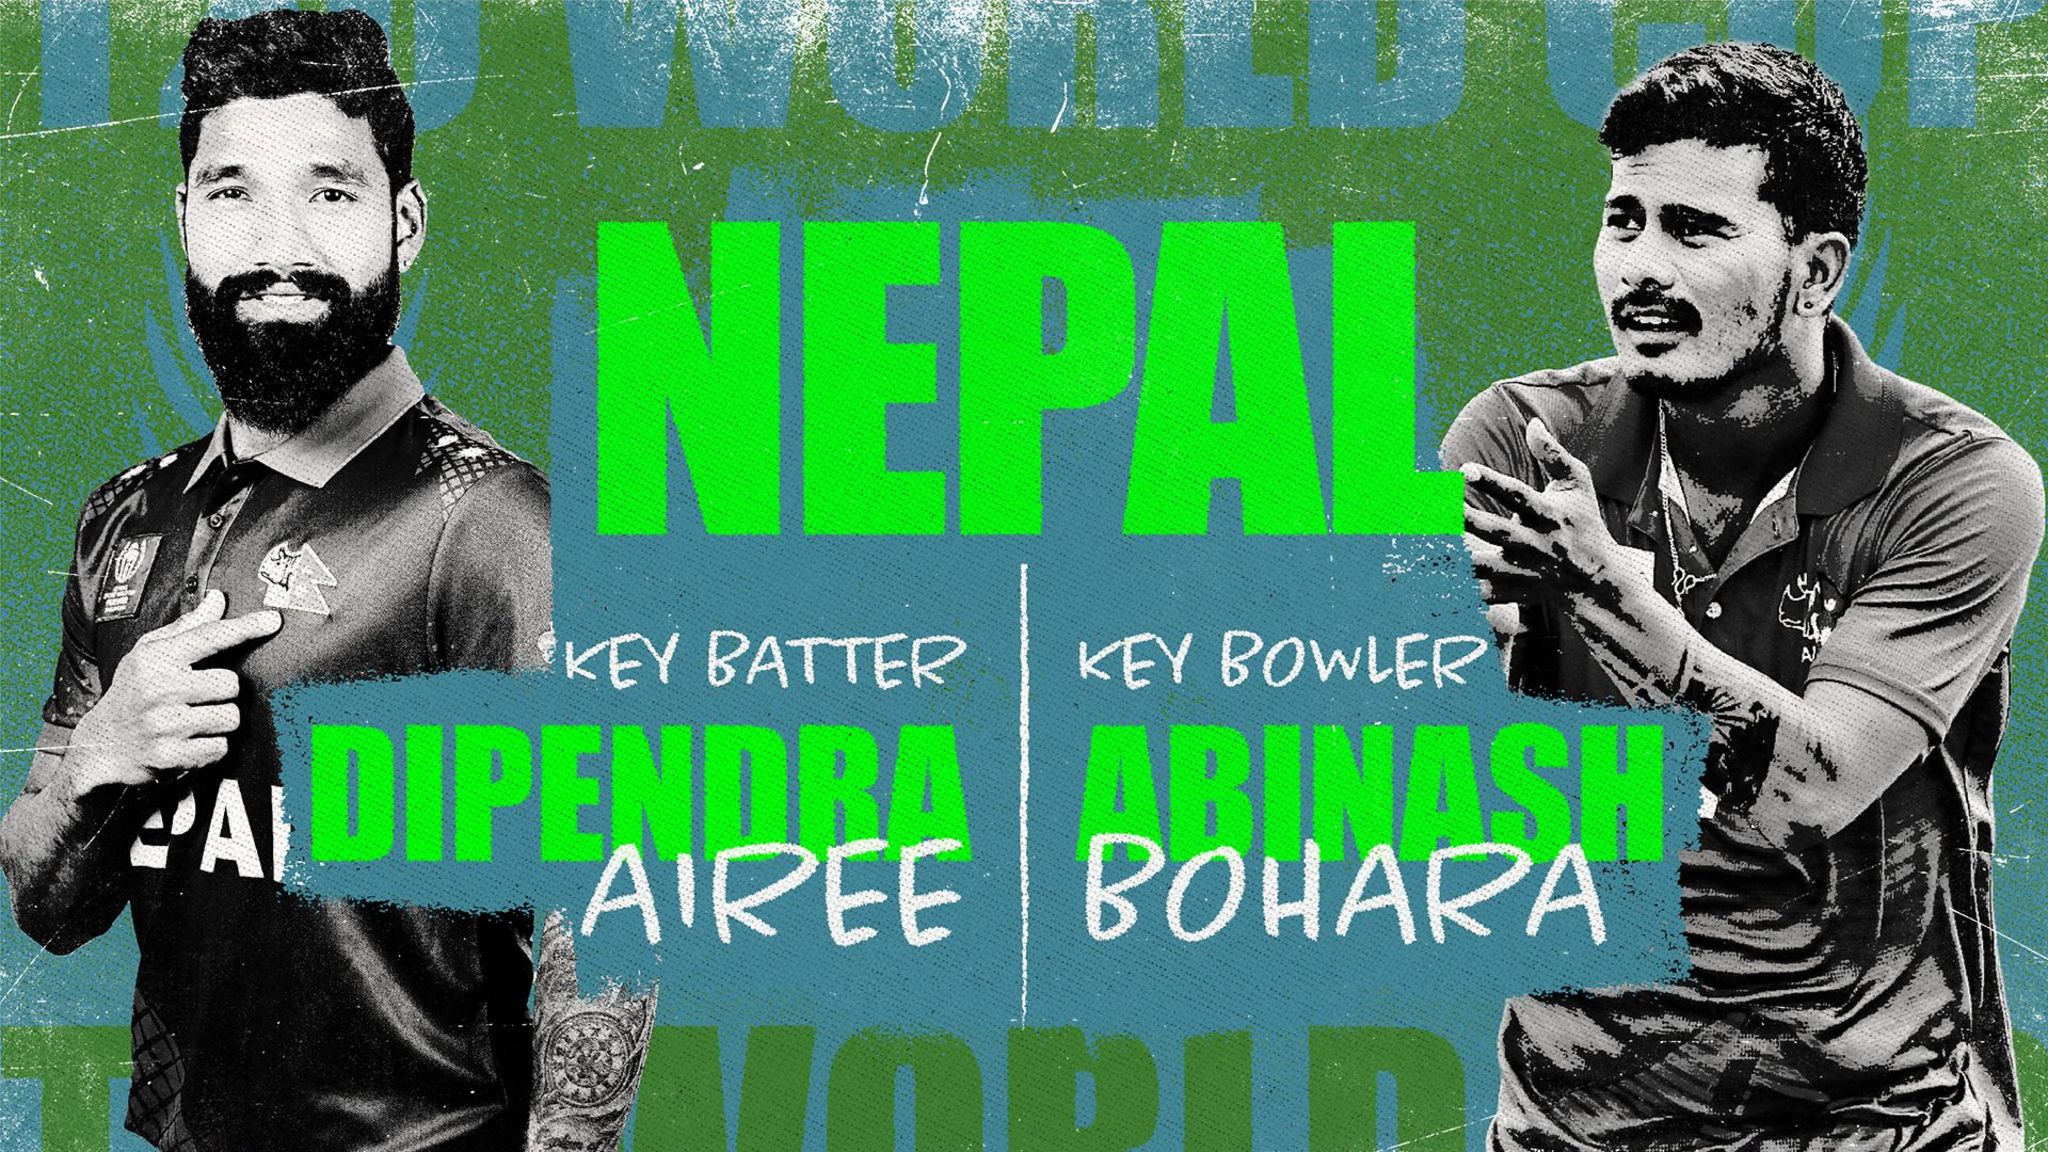 A graphic showing Dipenda Airee and Abinash Bohara as Nepal's key batter and bowler at the Men's T20 World Cup